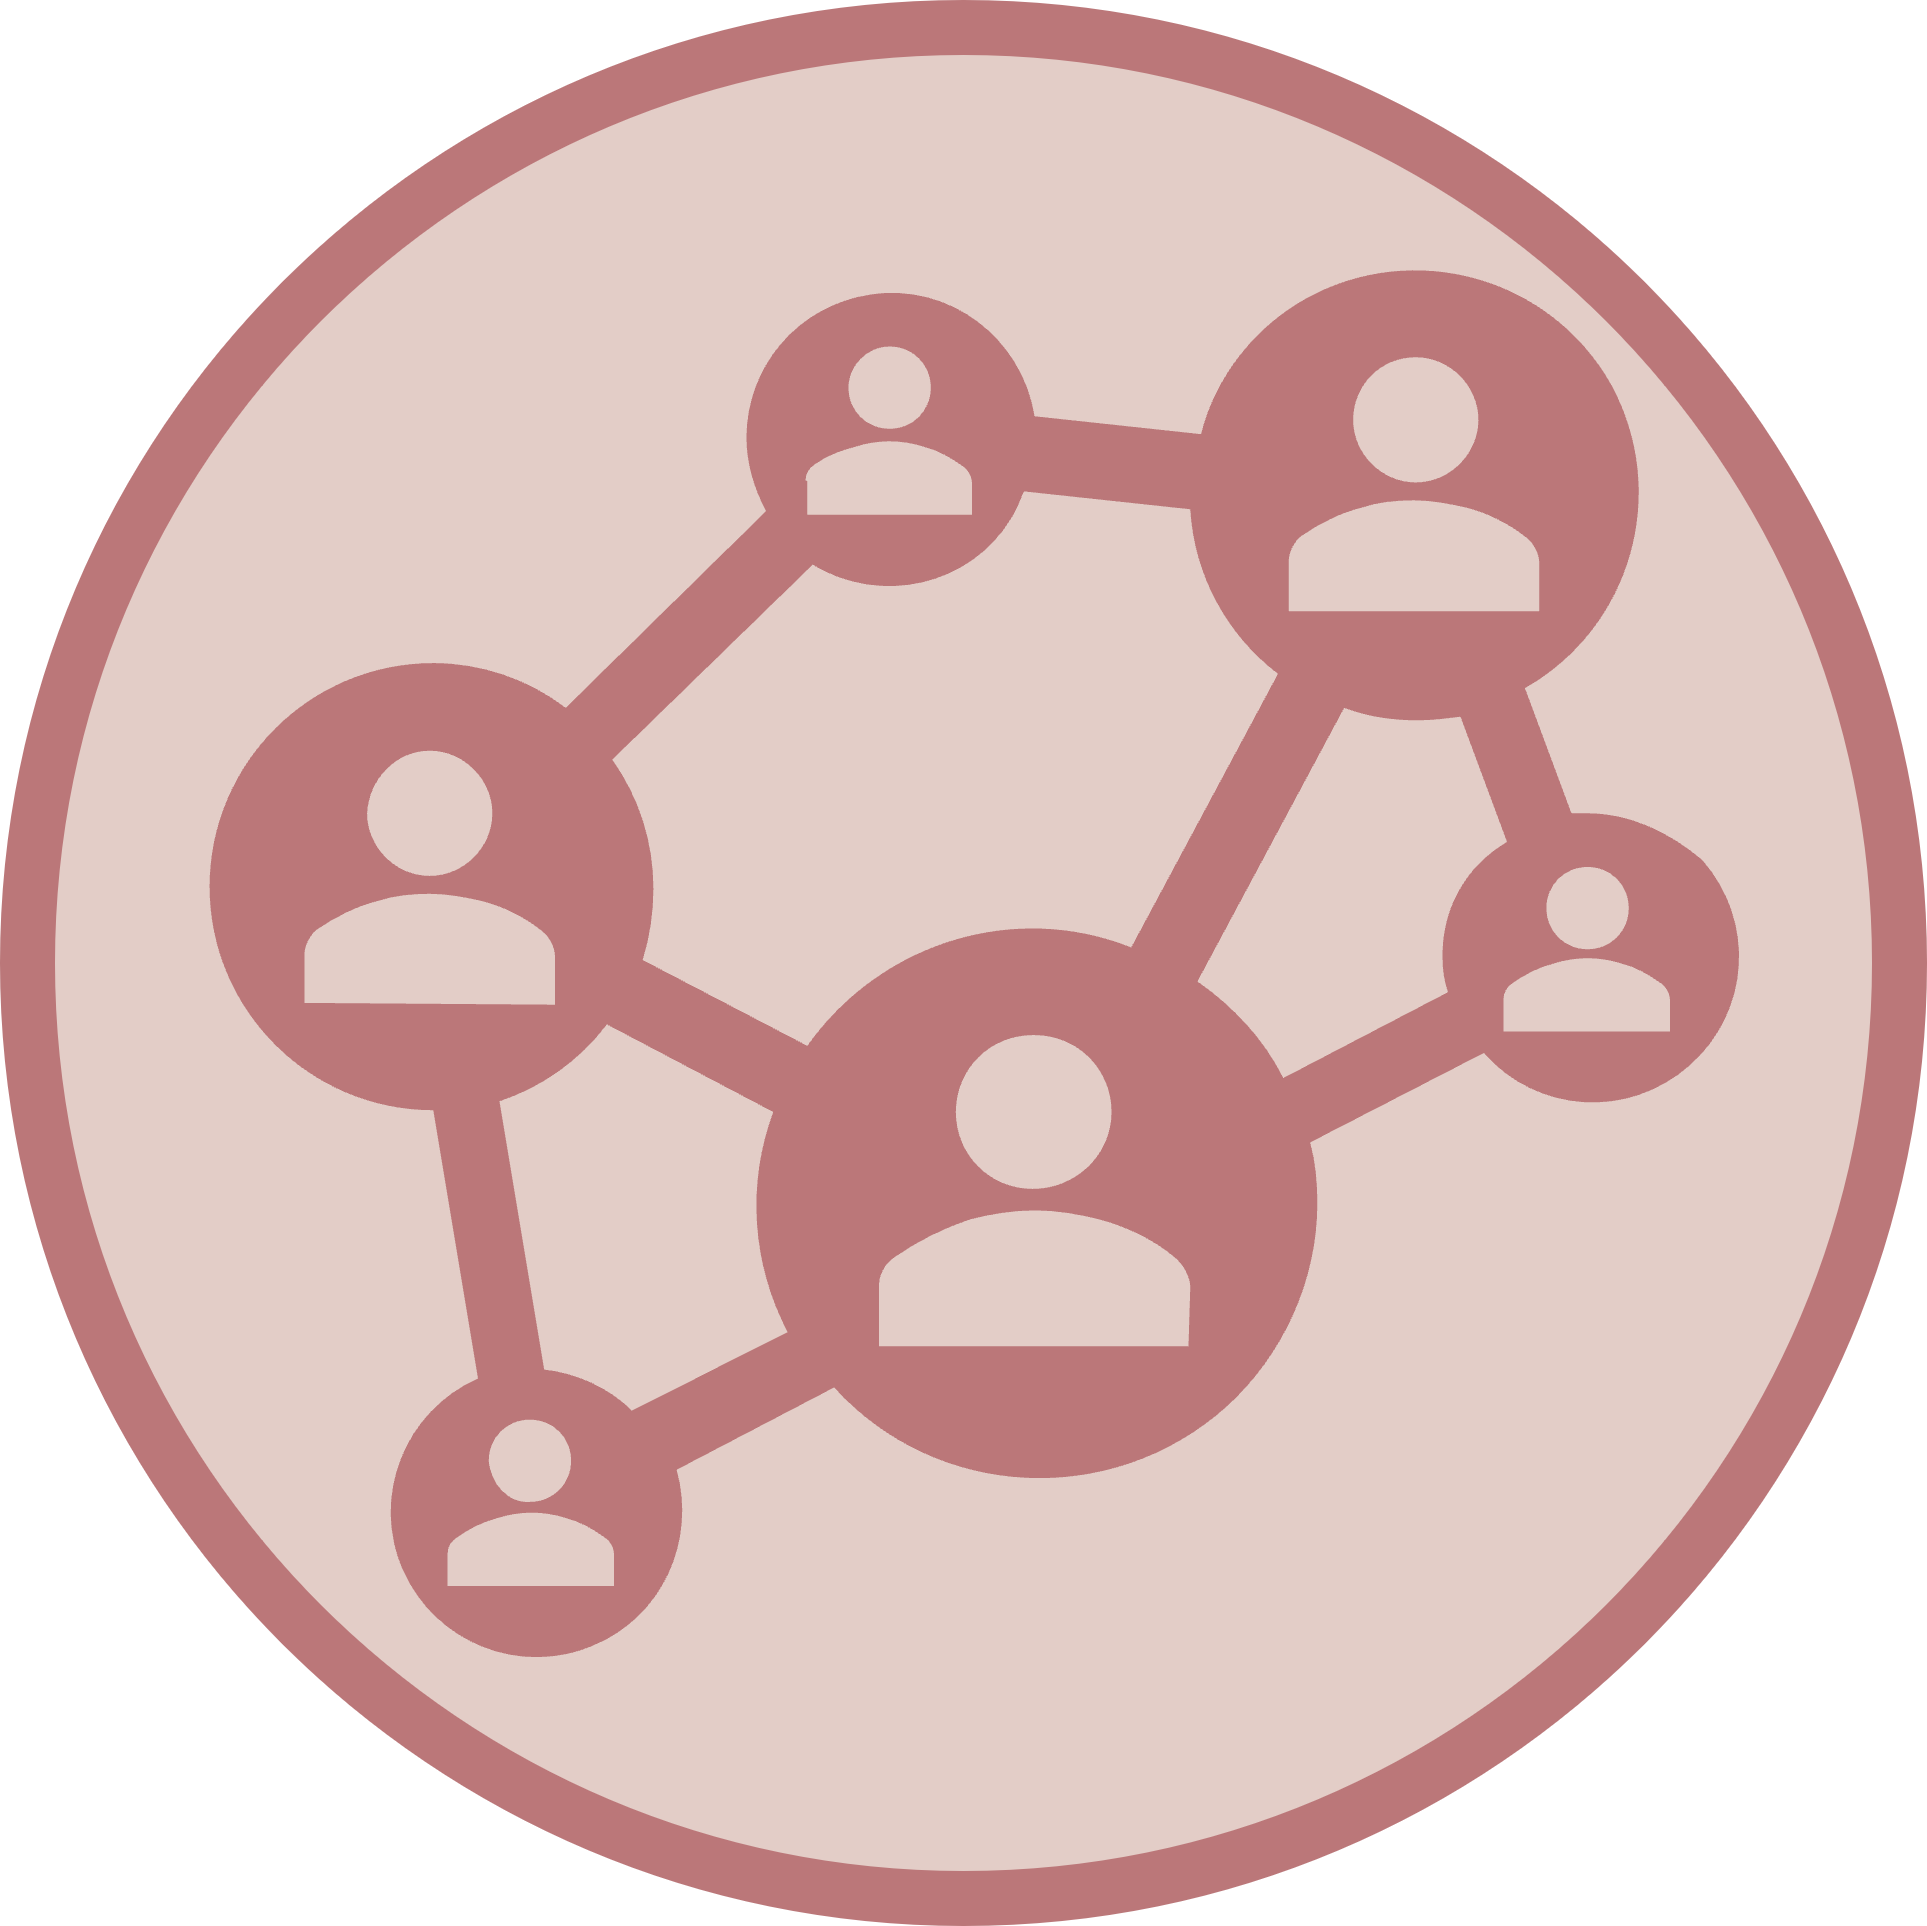 Accessibility badge: dark pink people netwrok icon on light pink background